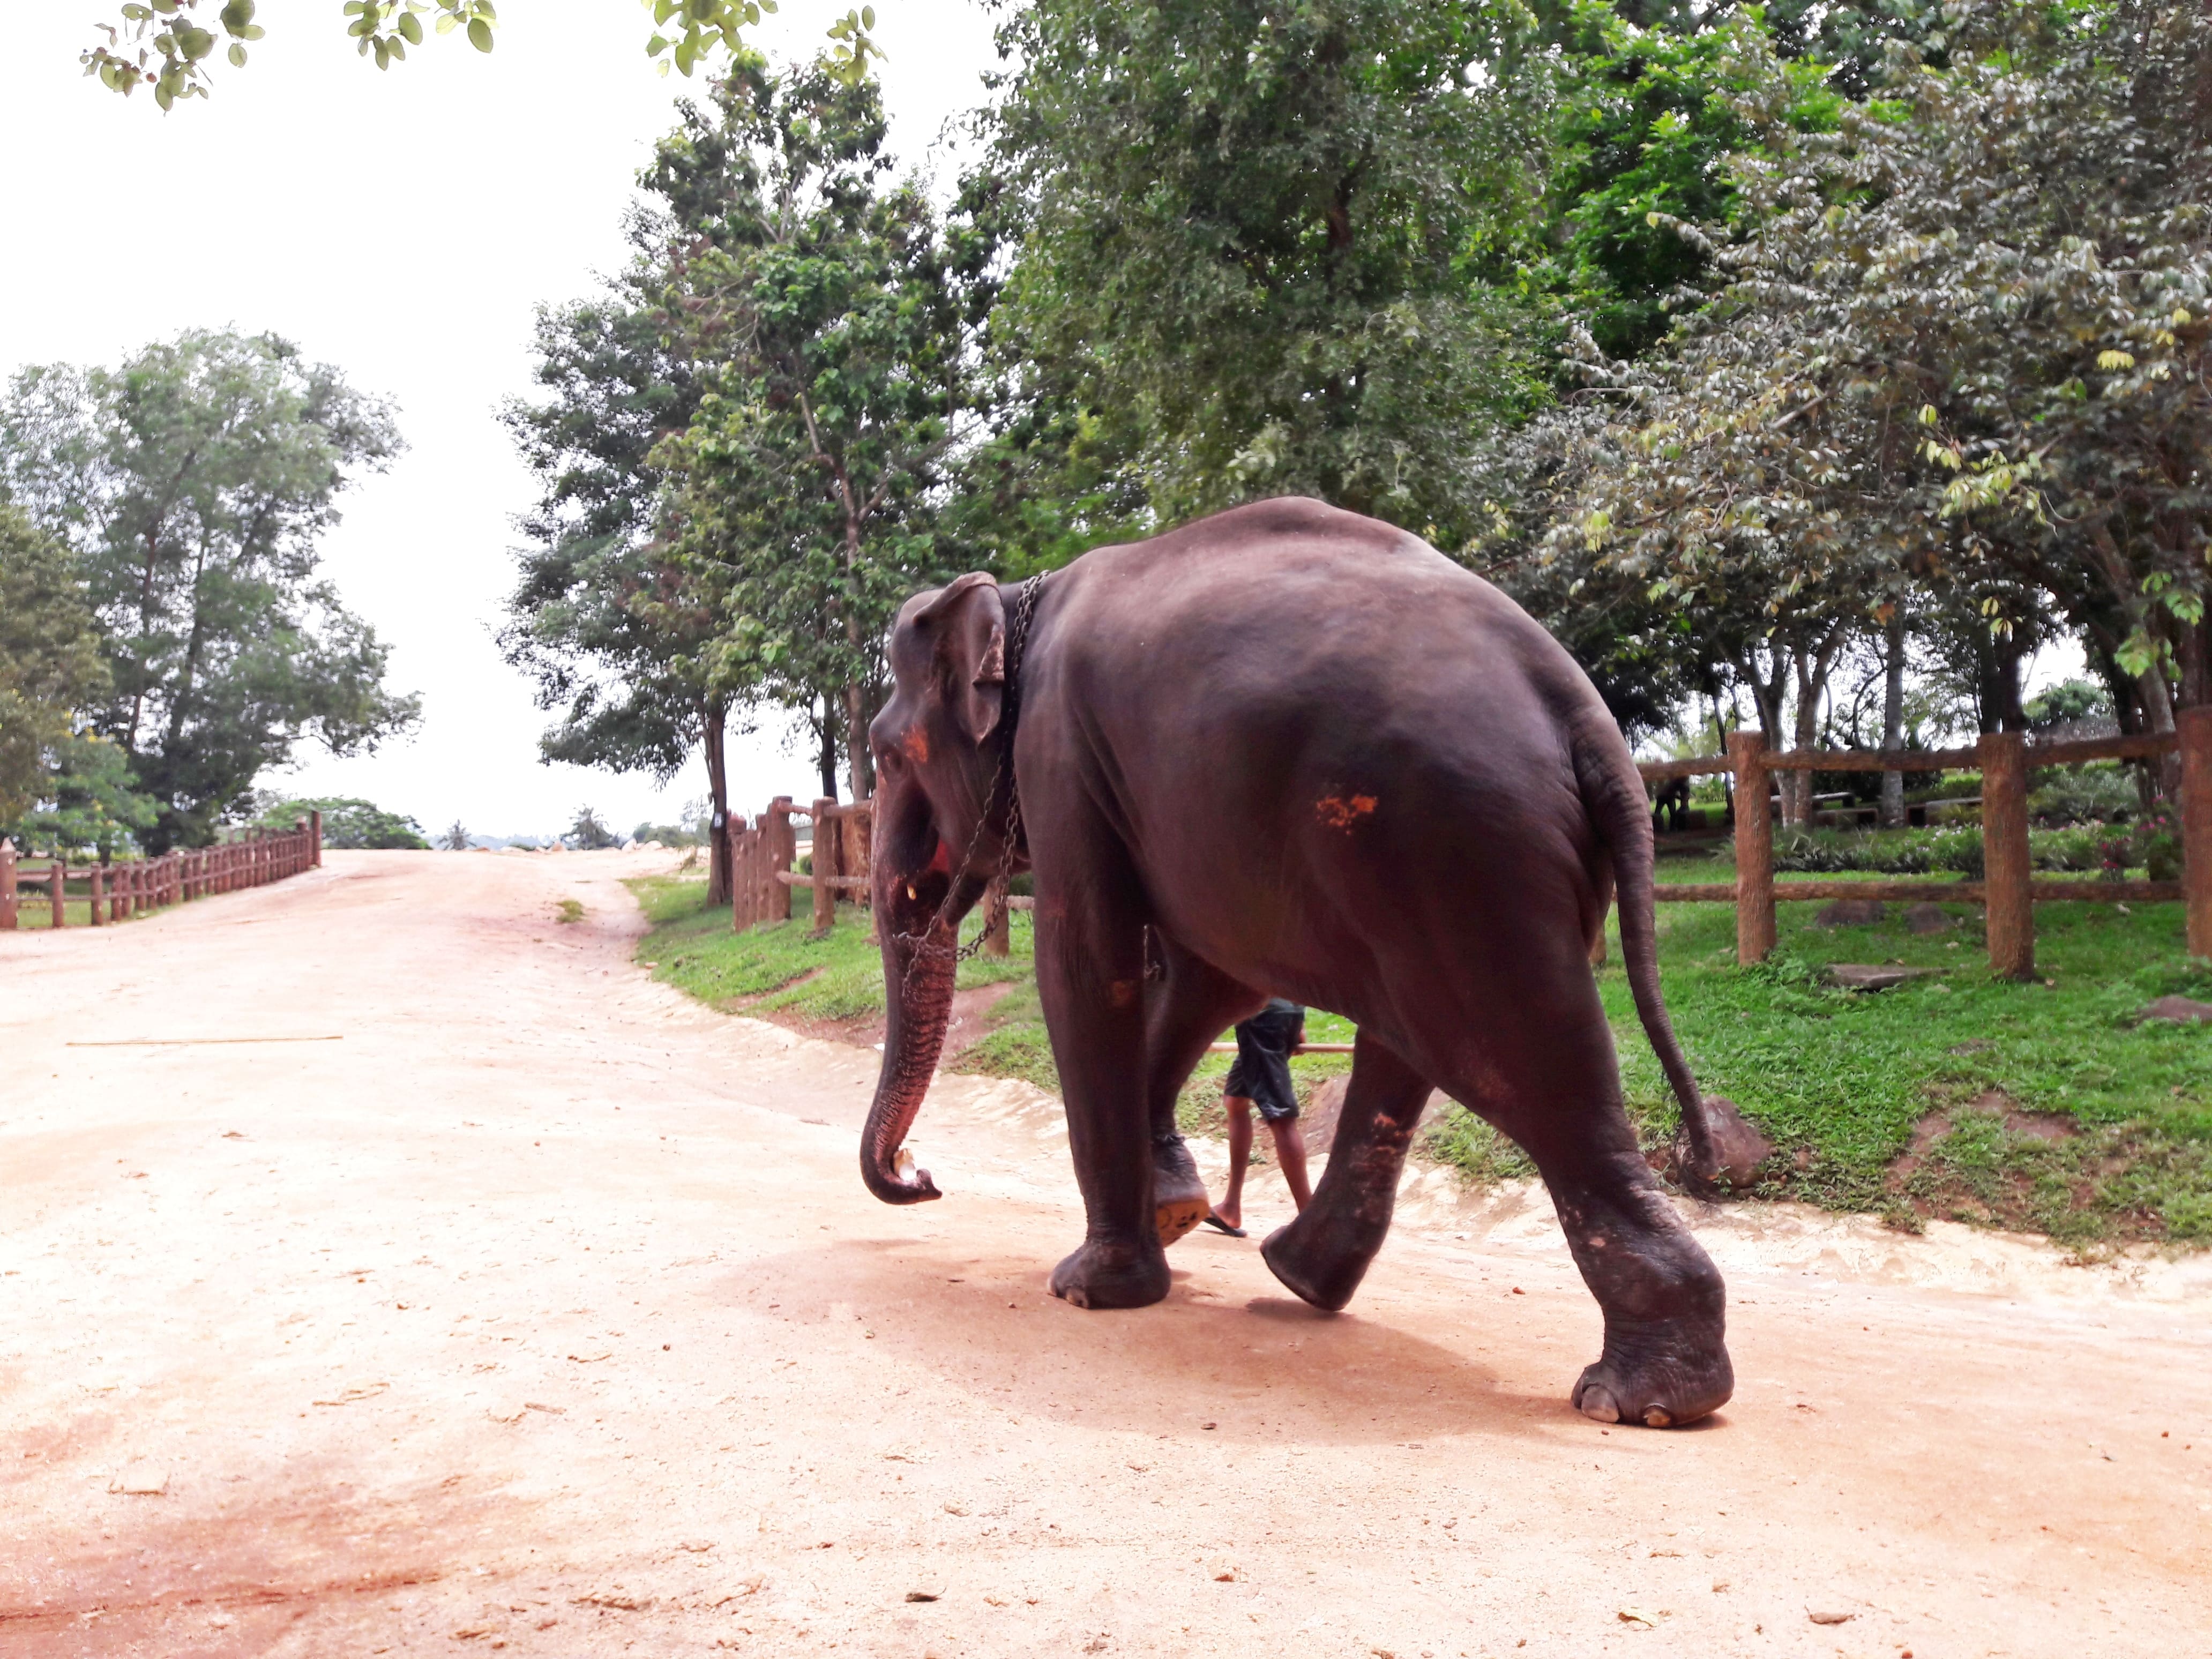 Pinnawala elephant orphanage is a must do place in your 4 day Sri Lanka itinerary